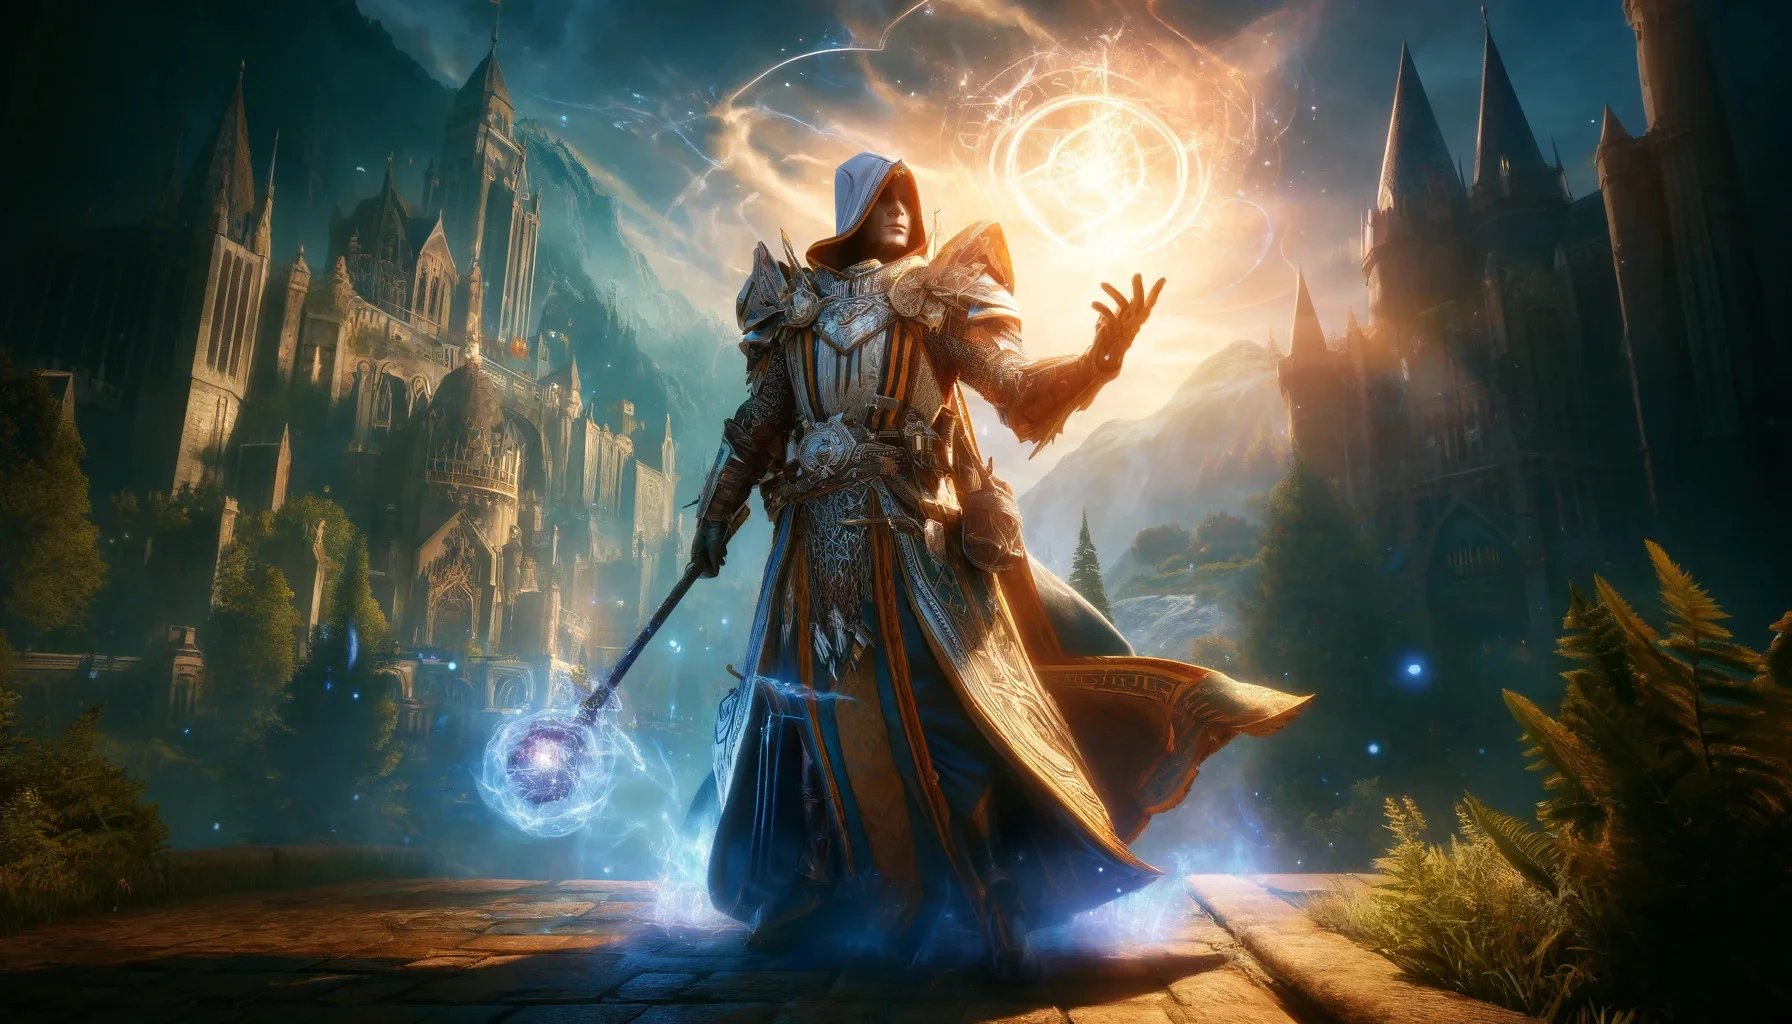 Knight Enchanter Build - Wizard Mage cover image